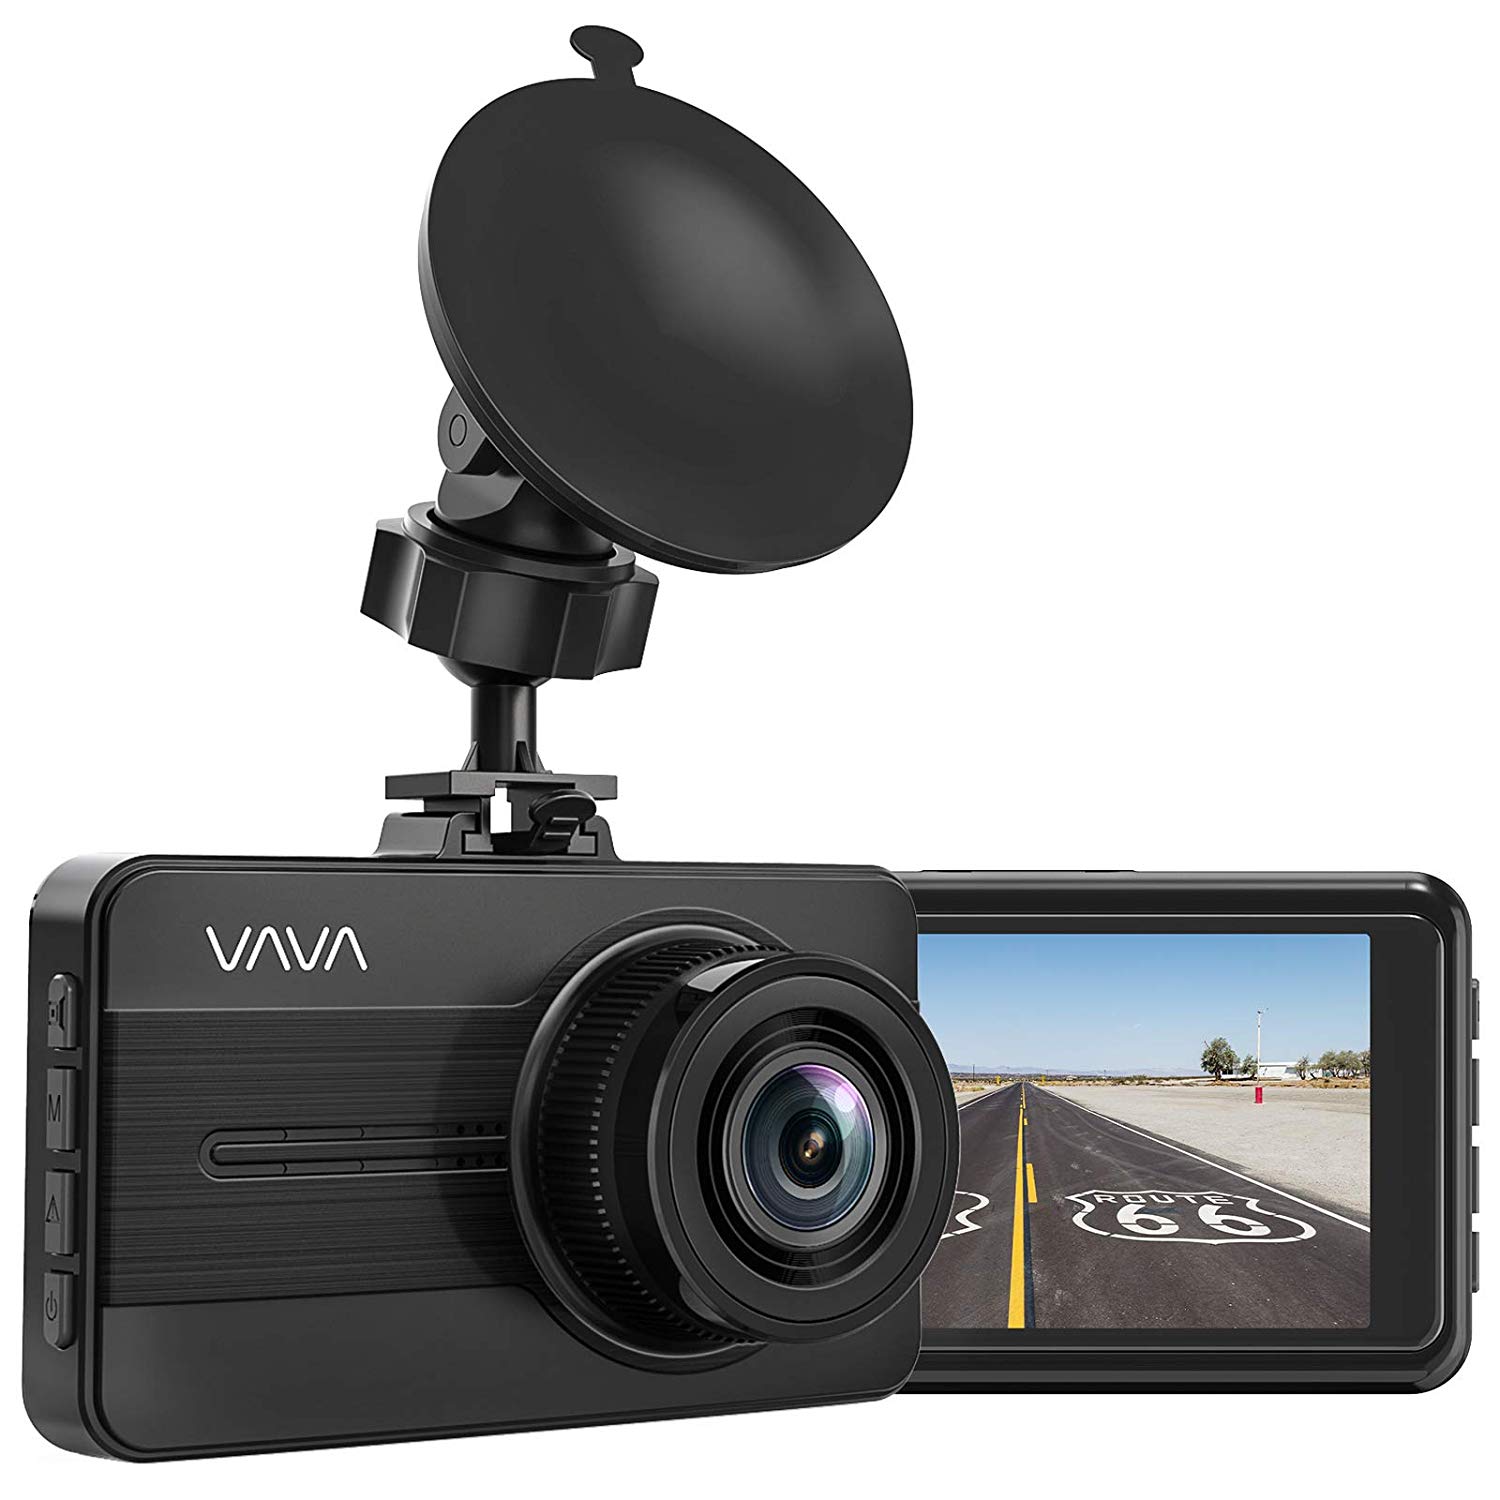 Today only: VAVA 1080P Full HD Car DVR dash cam for $35